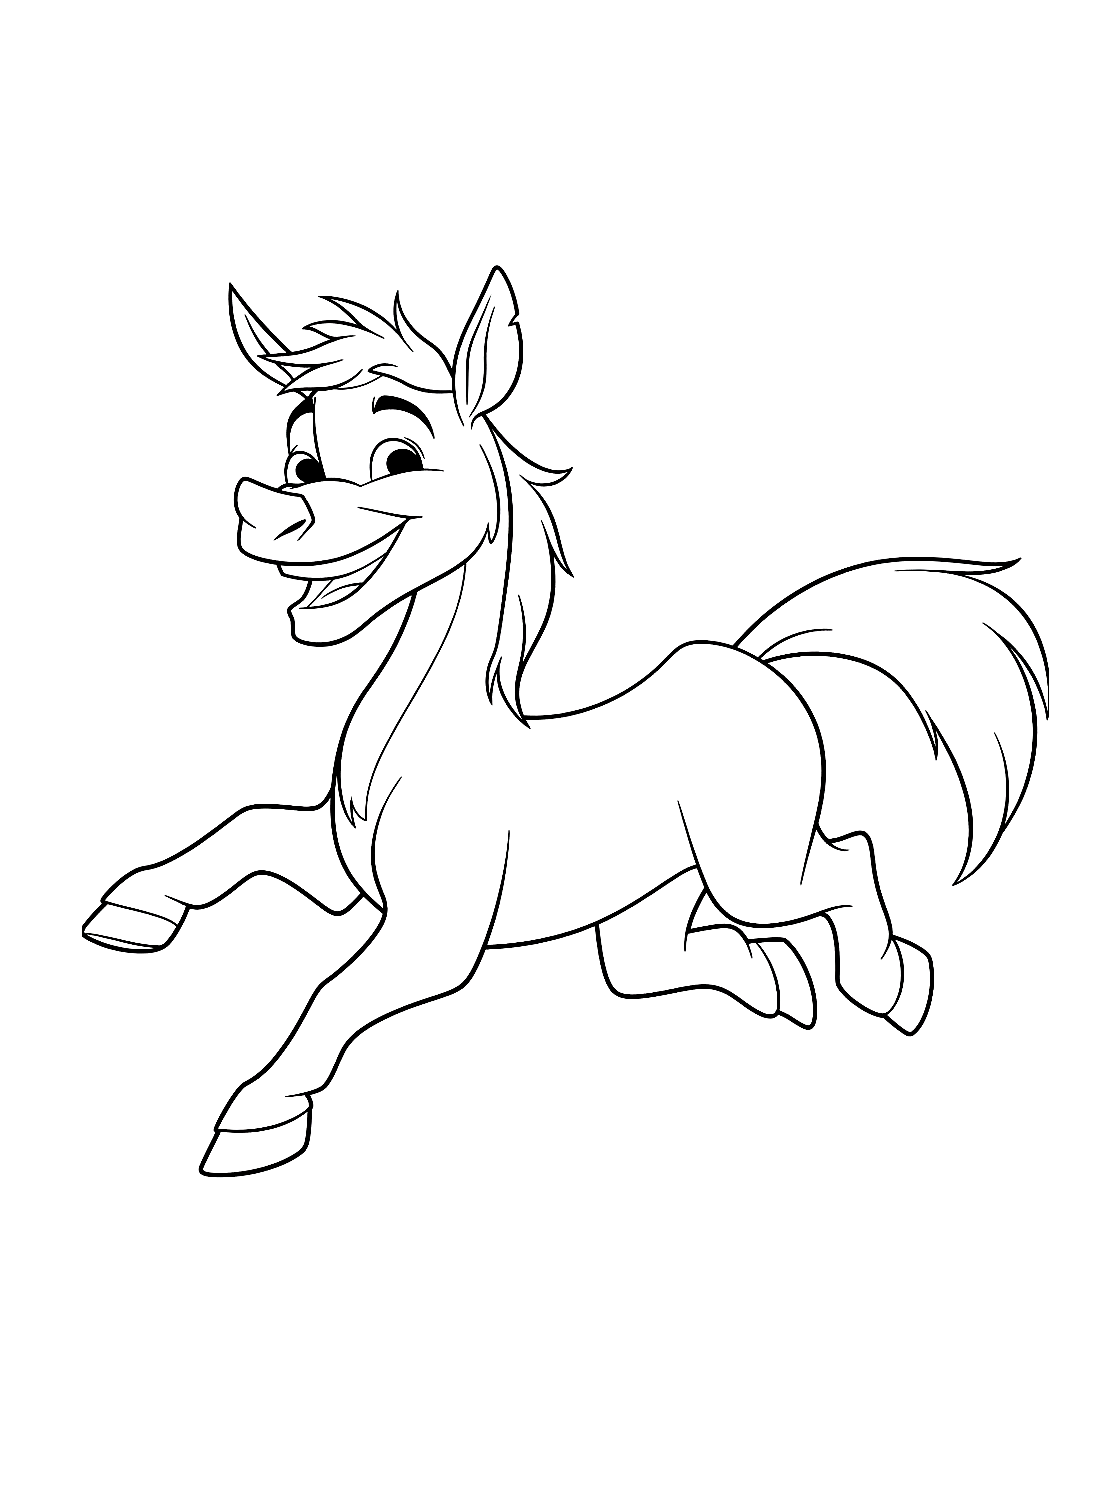 Running Donkey Coloring Pages